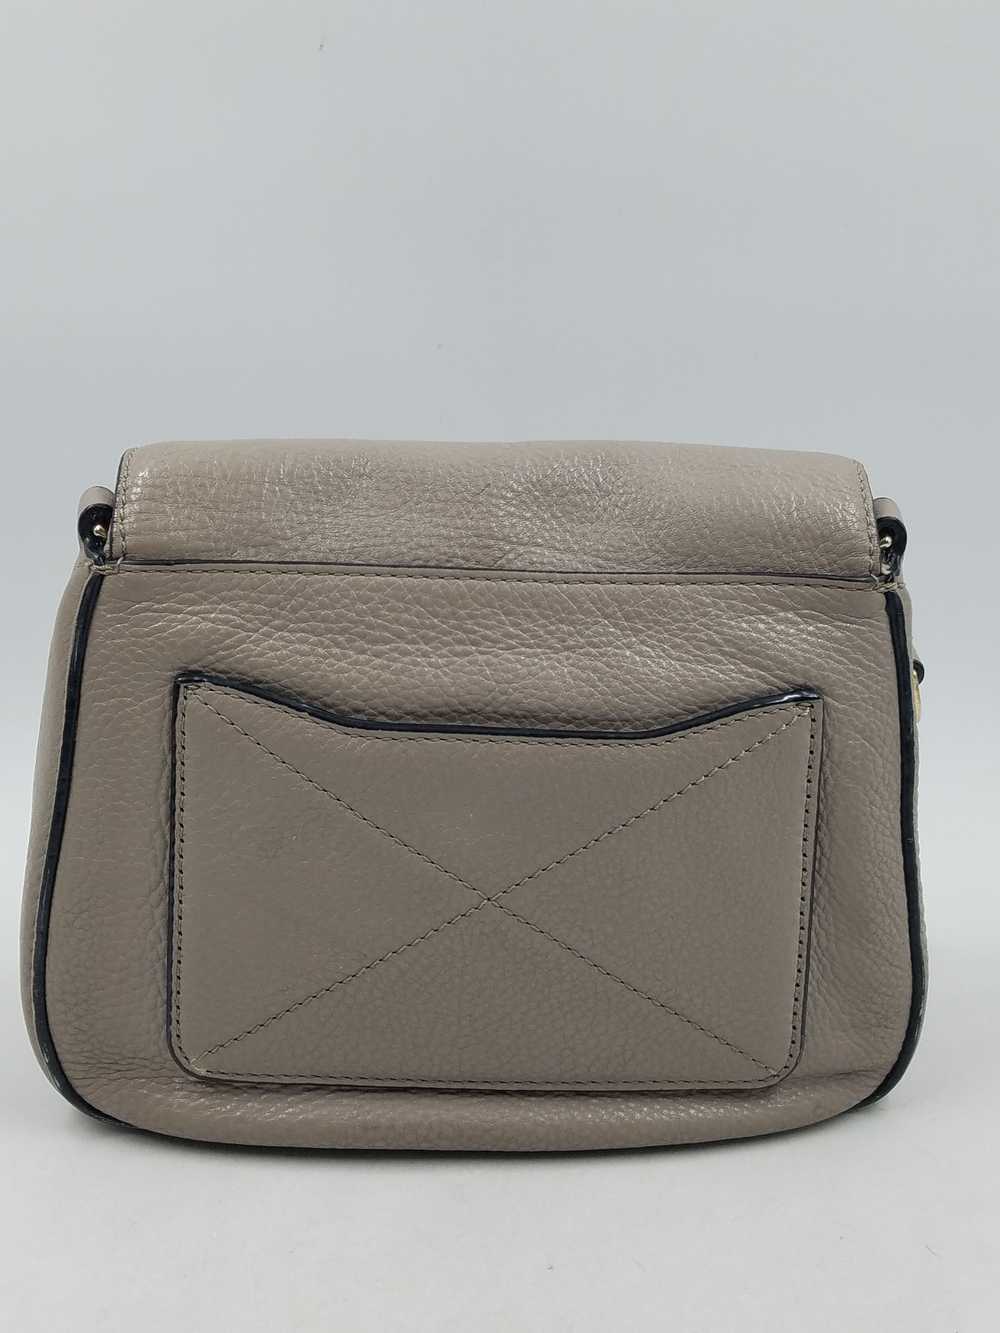 Authentic Marc Jacobs Taupe Saddle Bag - image 2